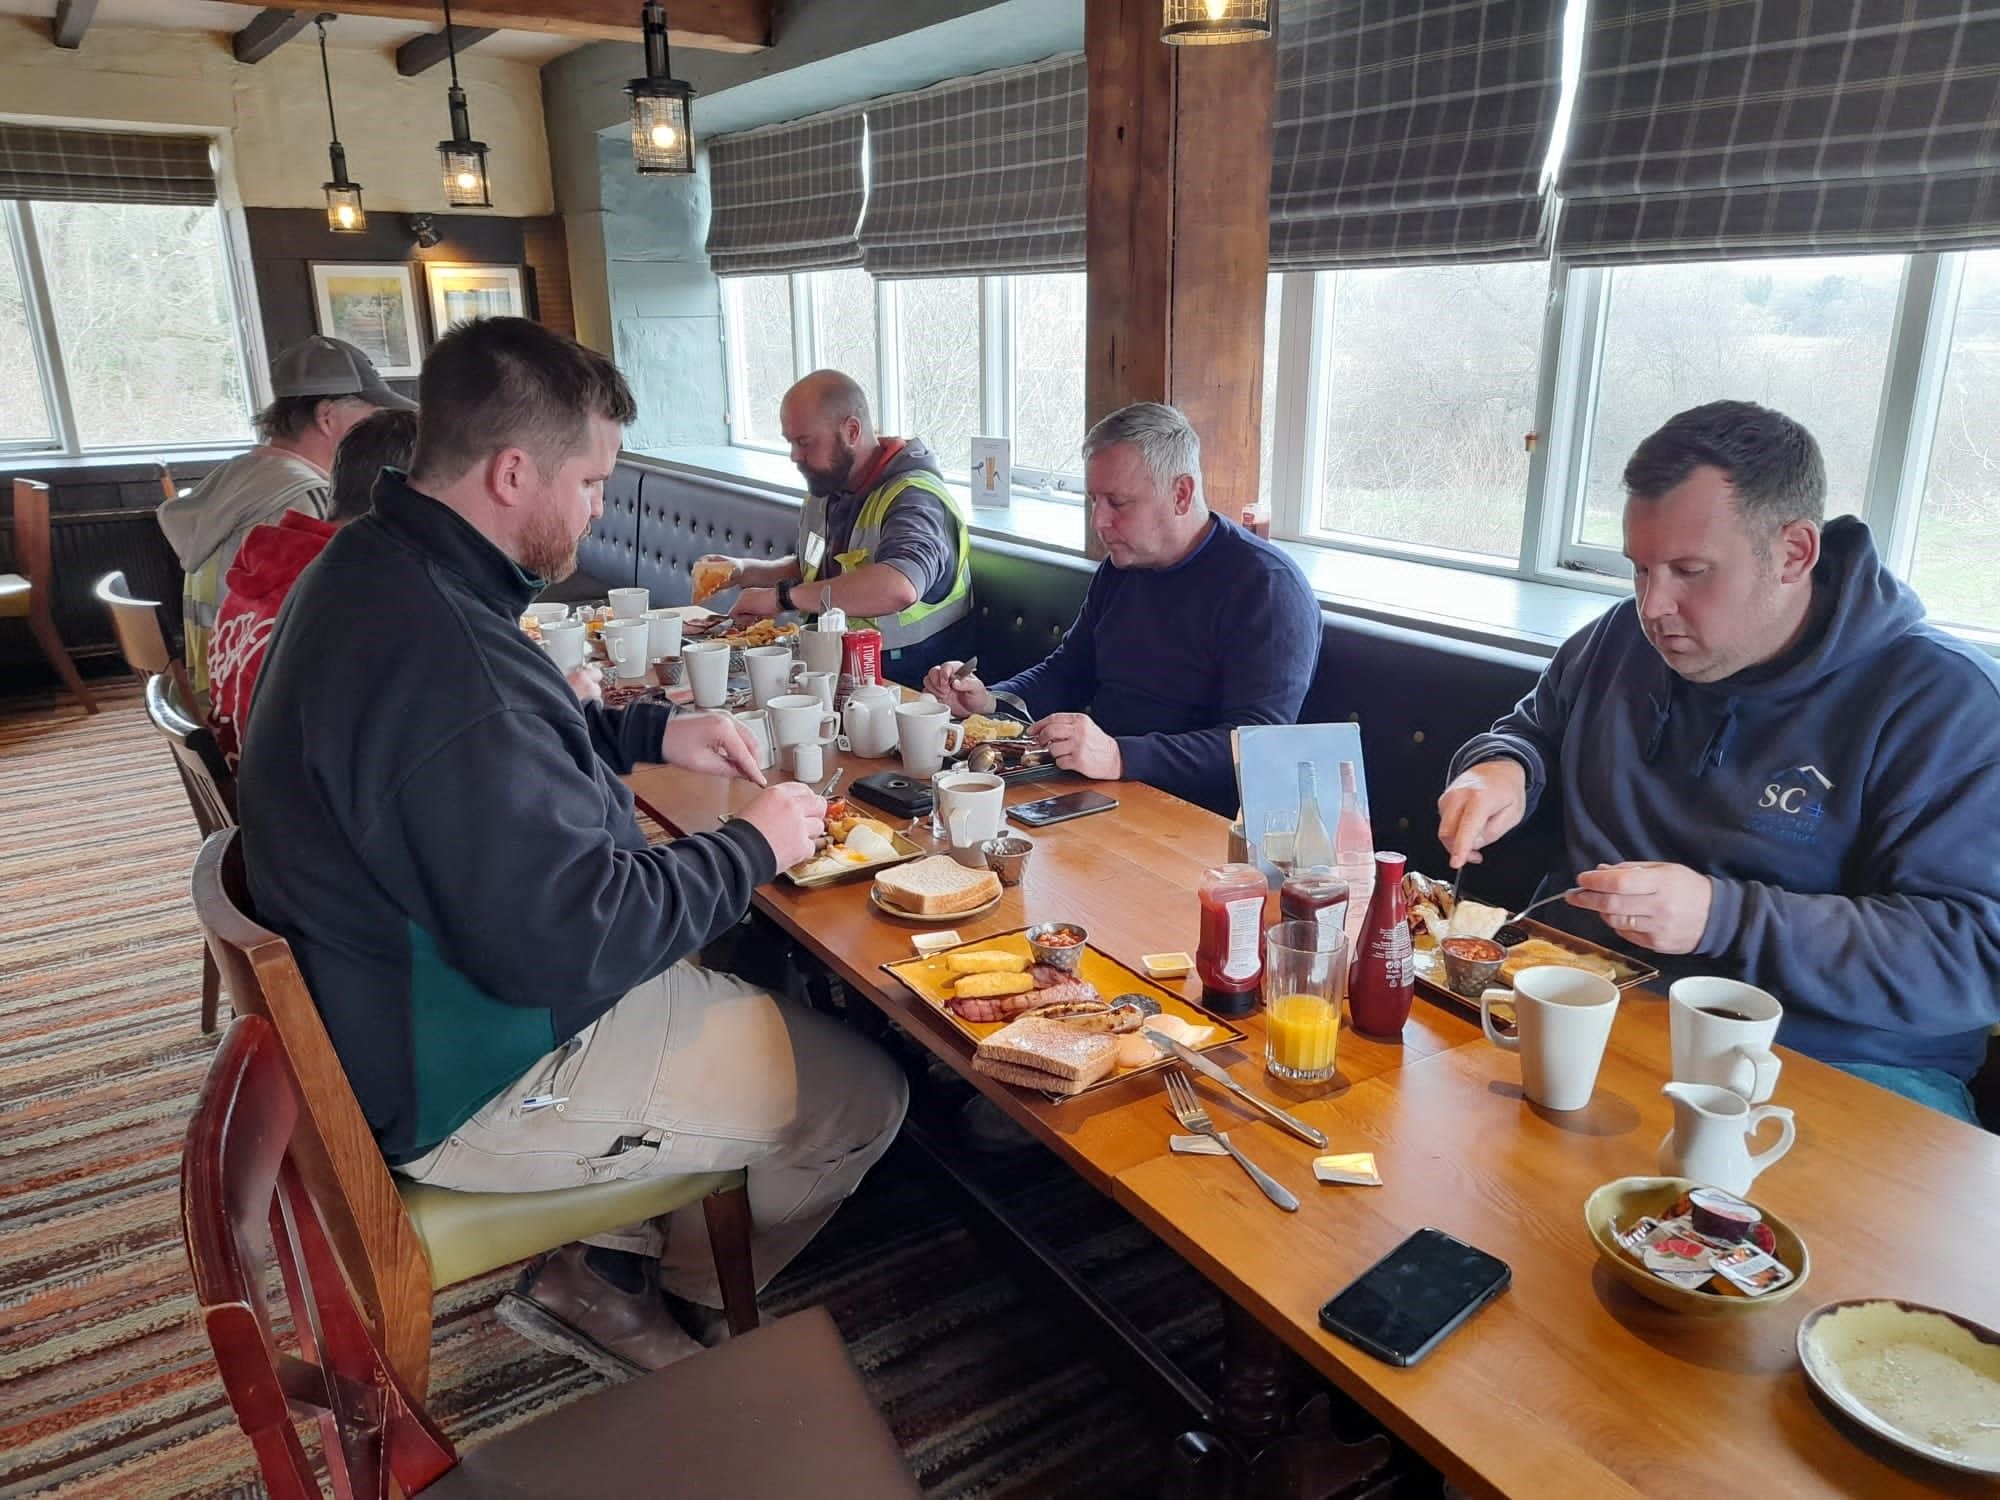 Members of the SC4 Team enjoy a cooked breakfast courtesy of Taylor Lane Timber Frame Ltd